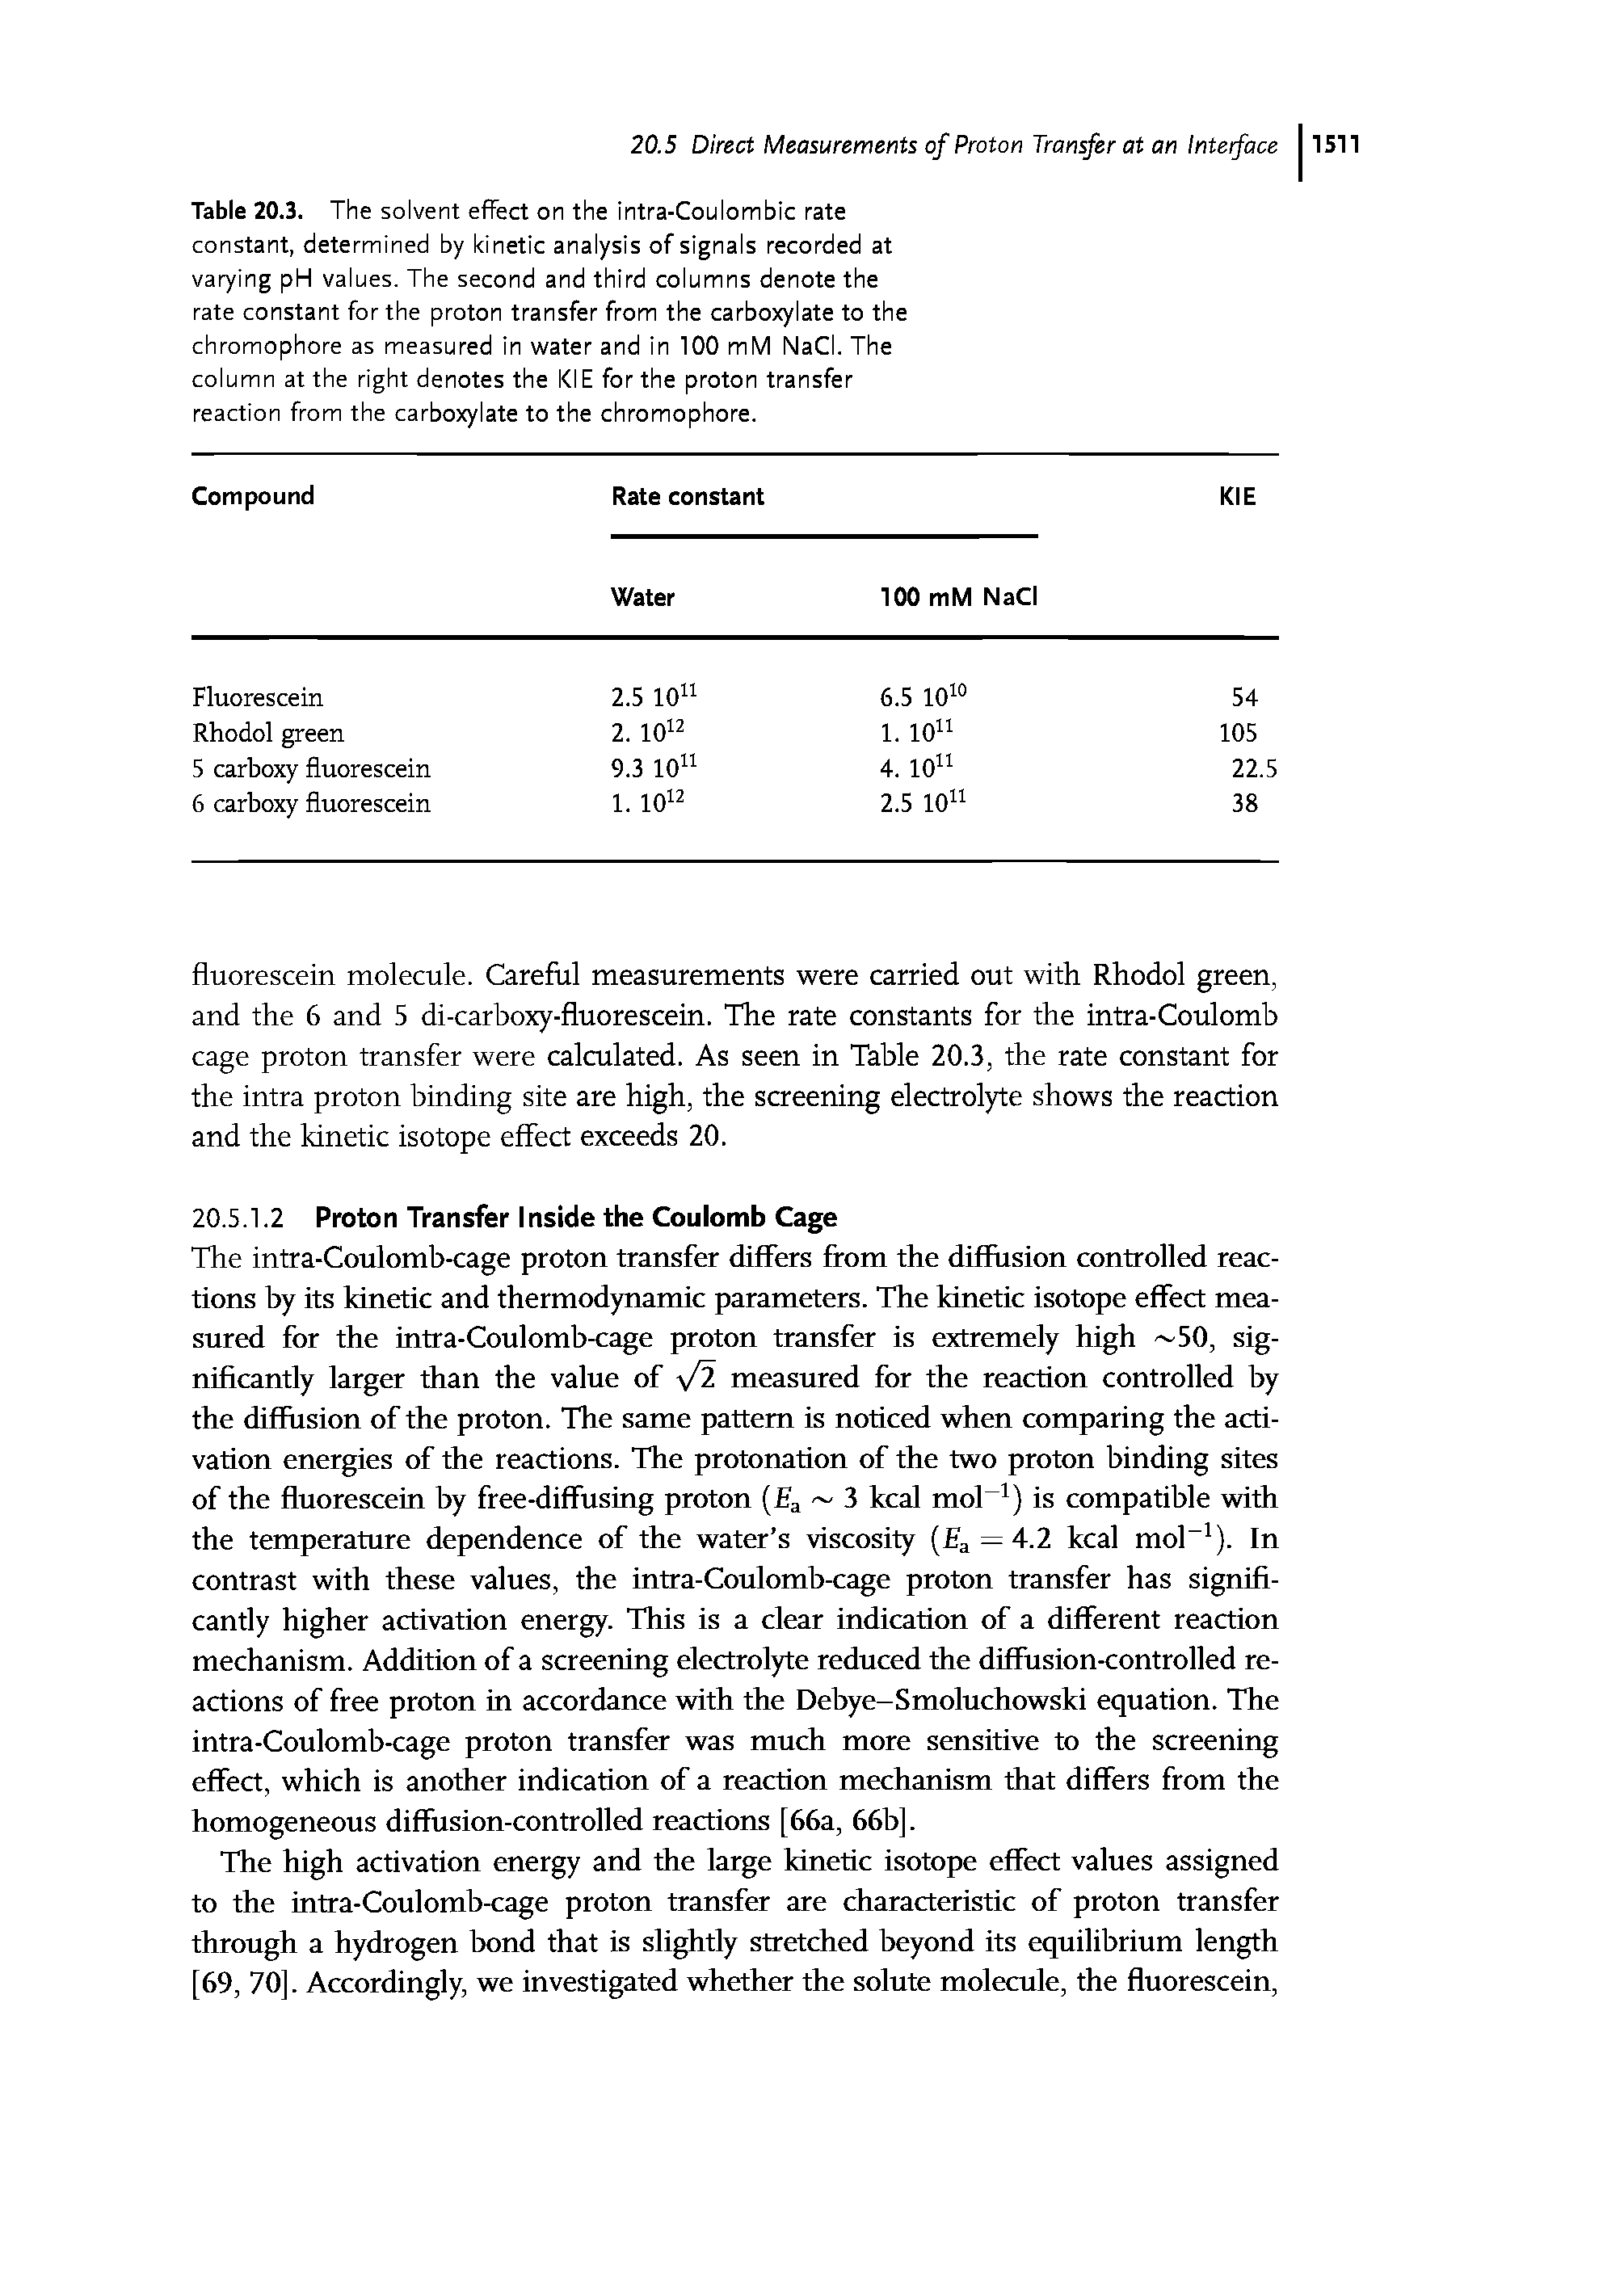 Table 20.3. The solvent effect on the intra-Coulombic rate constant, determined by kinetic analysis of signals recorded at varying pH values. The second and third columns denote the rate constant for the proton transfer from the carboxylate to the chromophore as measured in water and in 100 mM NaCI. The column at the right denotes the KIE for the proton transfer reaction from the carboxylate to the chromophore.